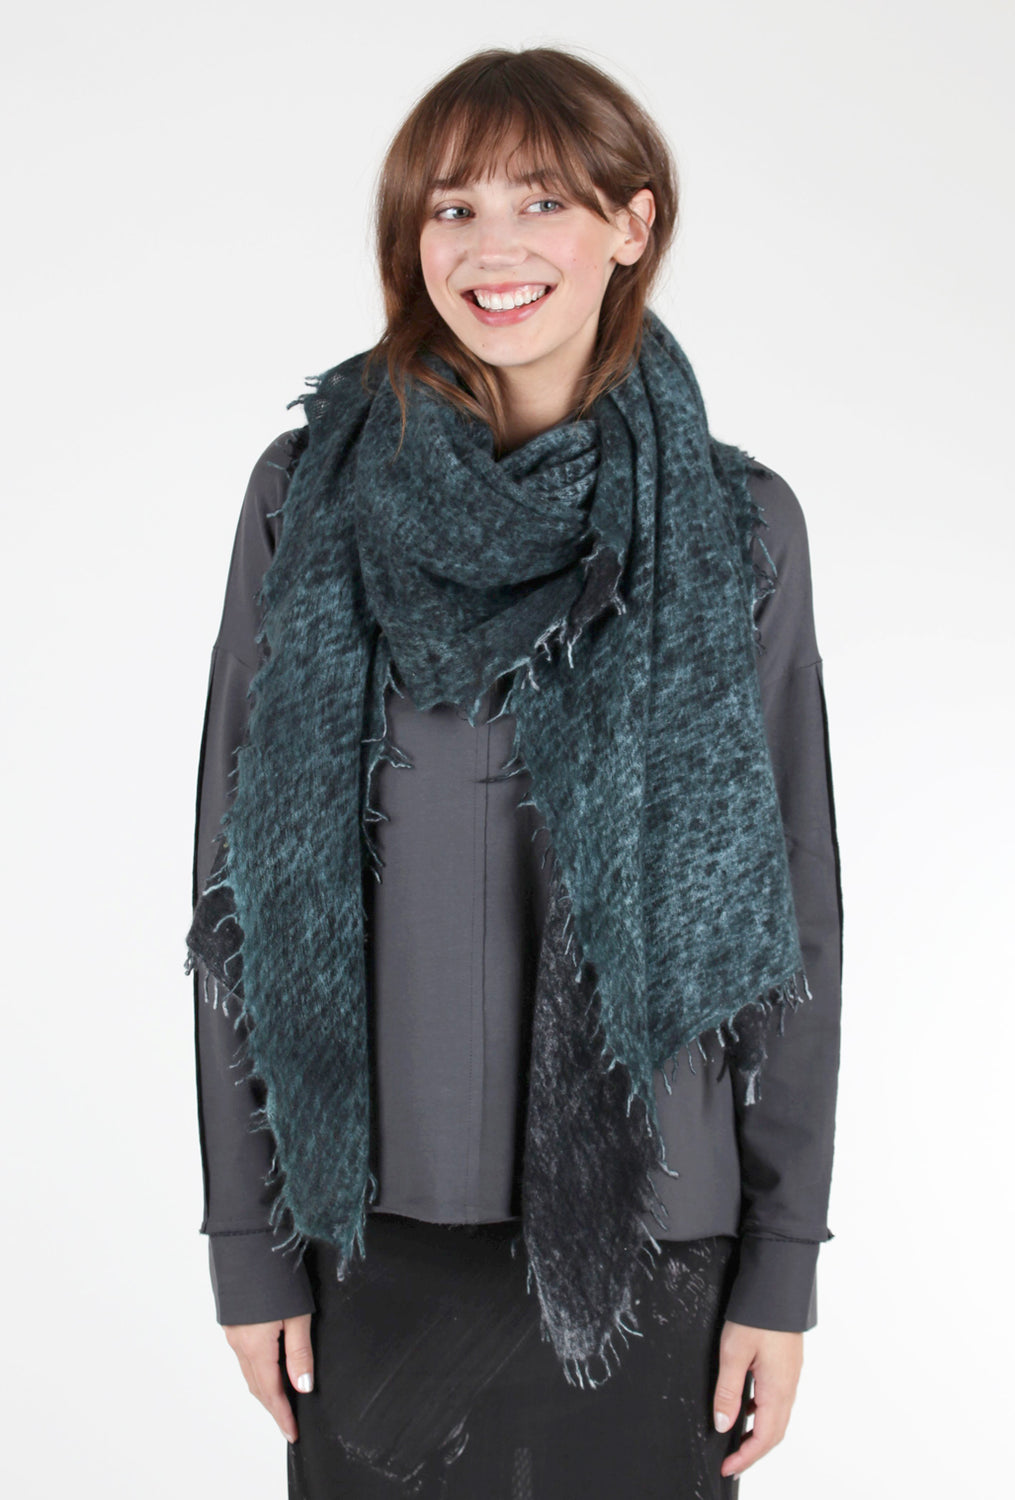 Fissore Cashmere Hand-Painted Cashmere Wrap, Teal 